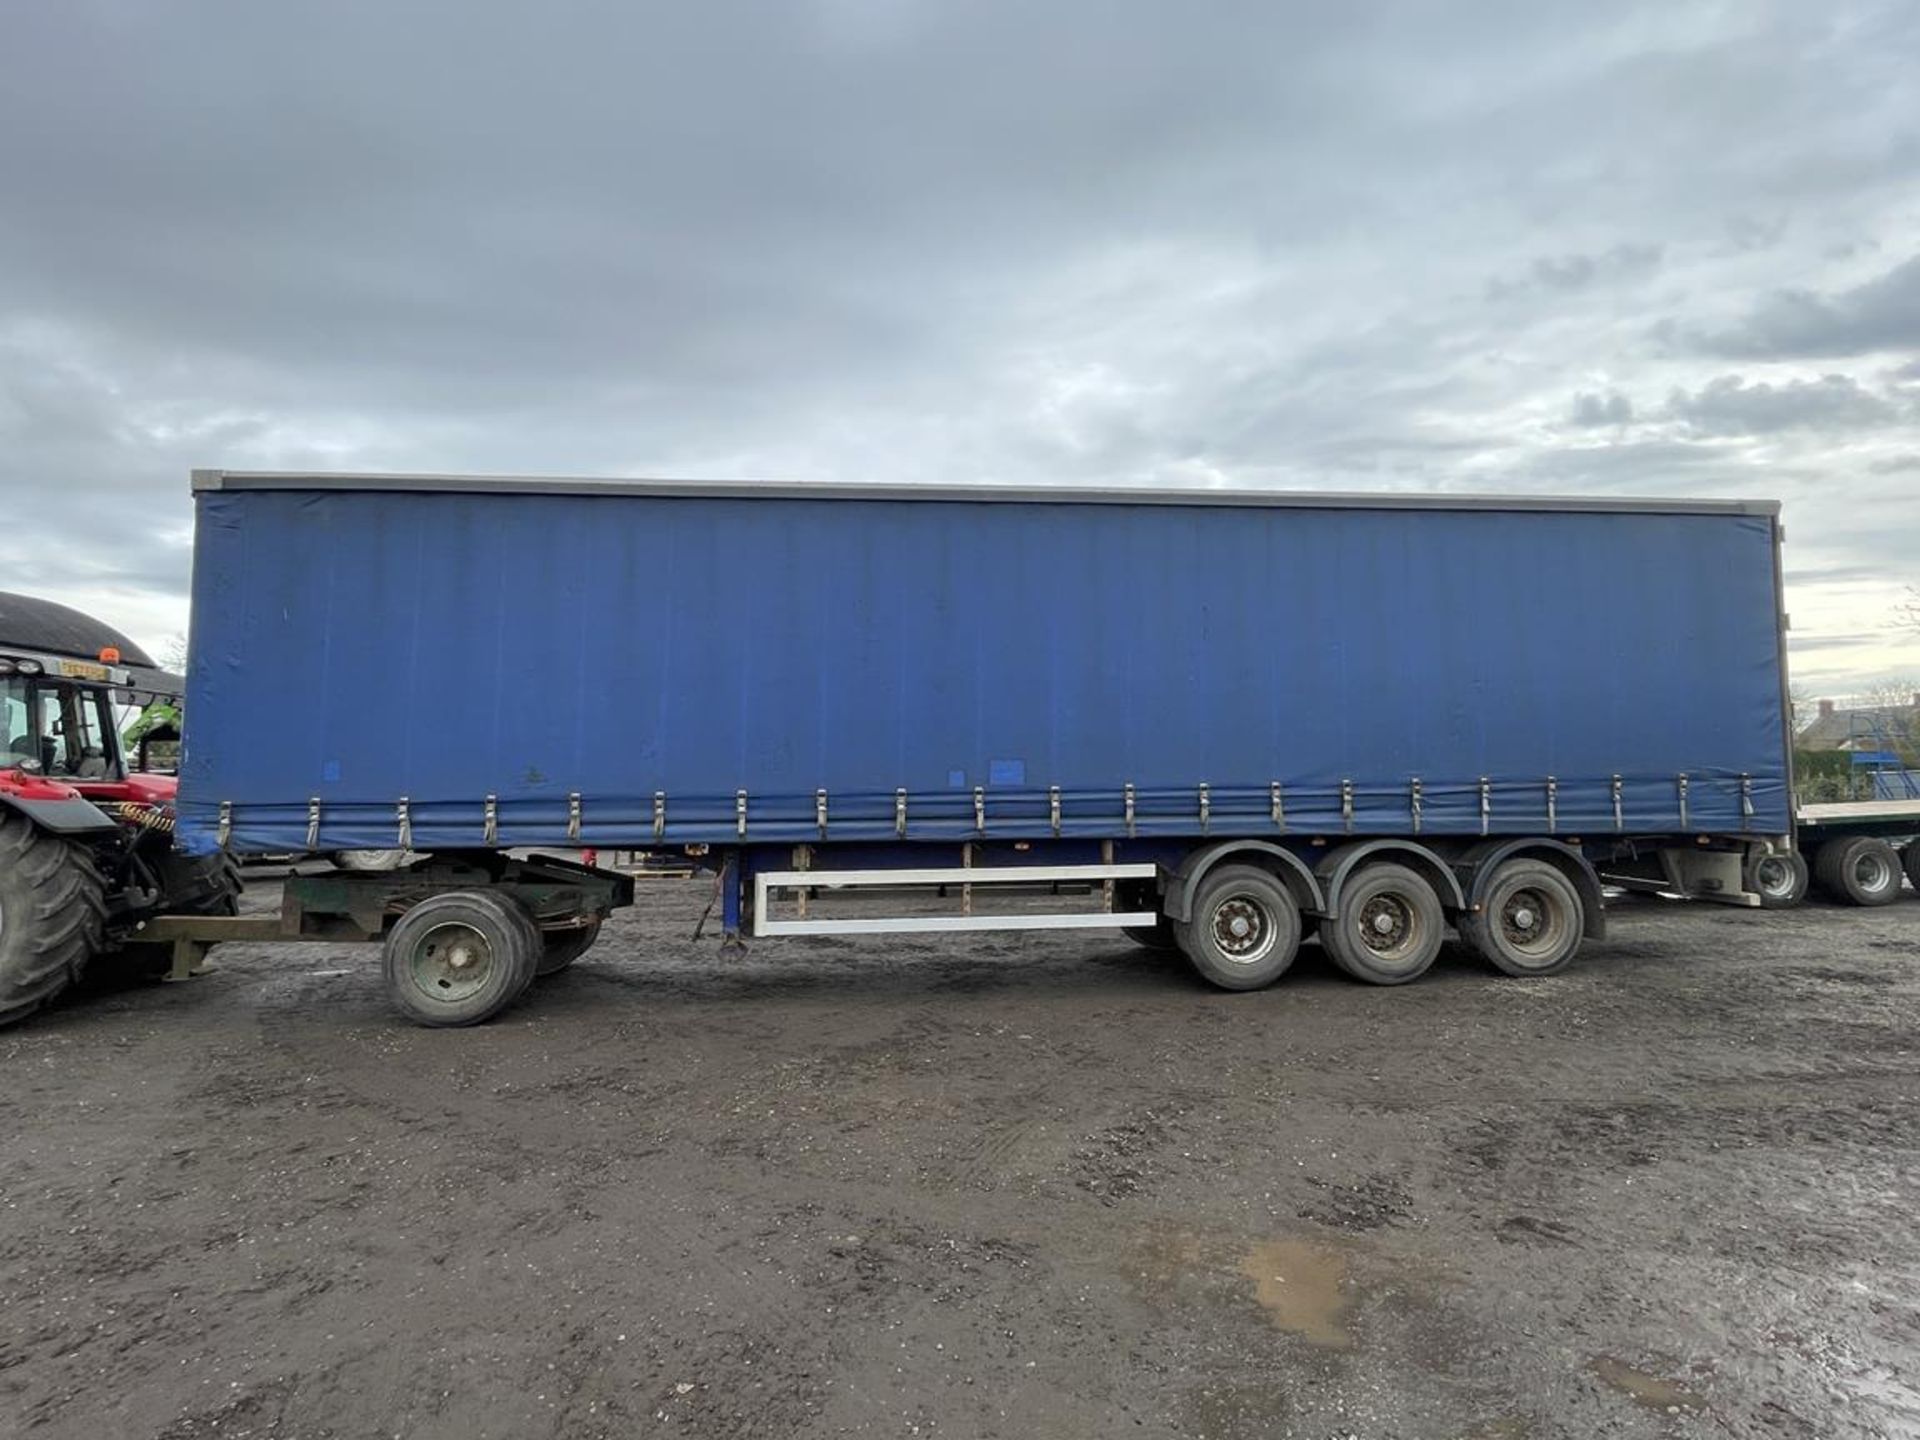 2006 Montracon EB+ ADR 25/2M Triple Axle Curtainside Trailer, VIN: 24688 with Rear Barn Doors. - Image 3 of 12